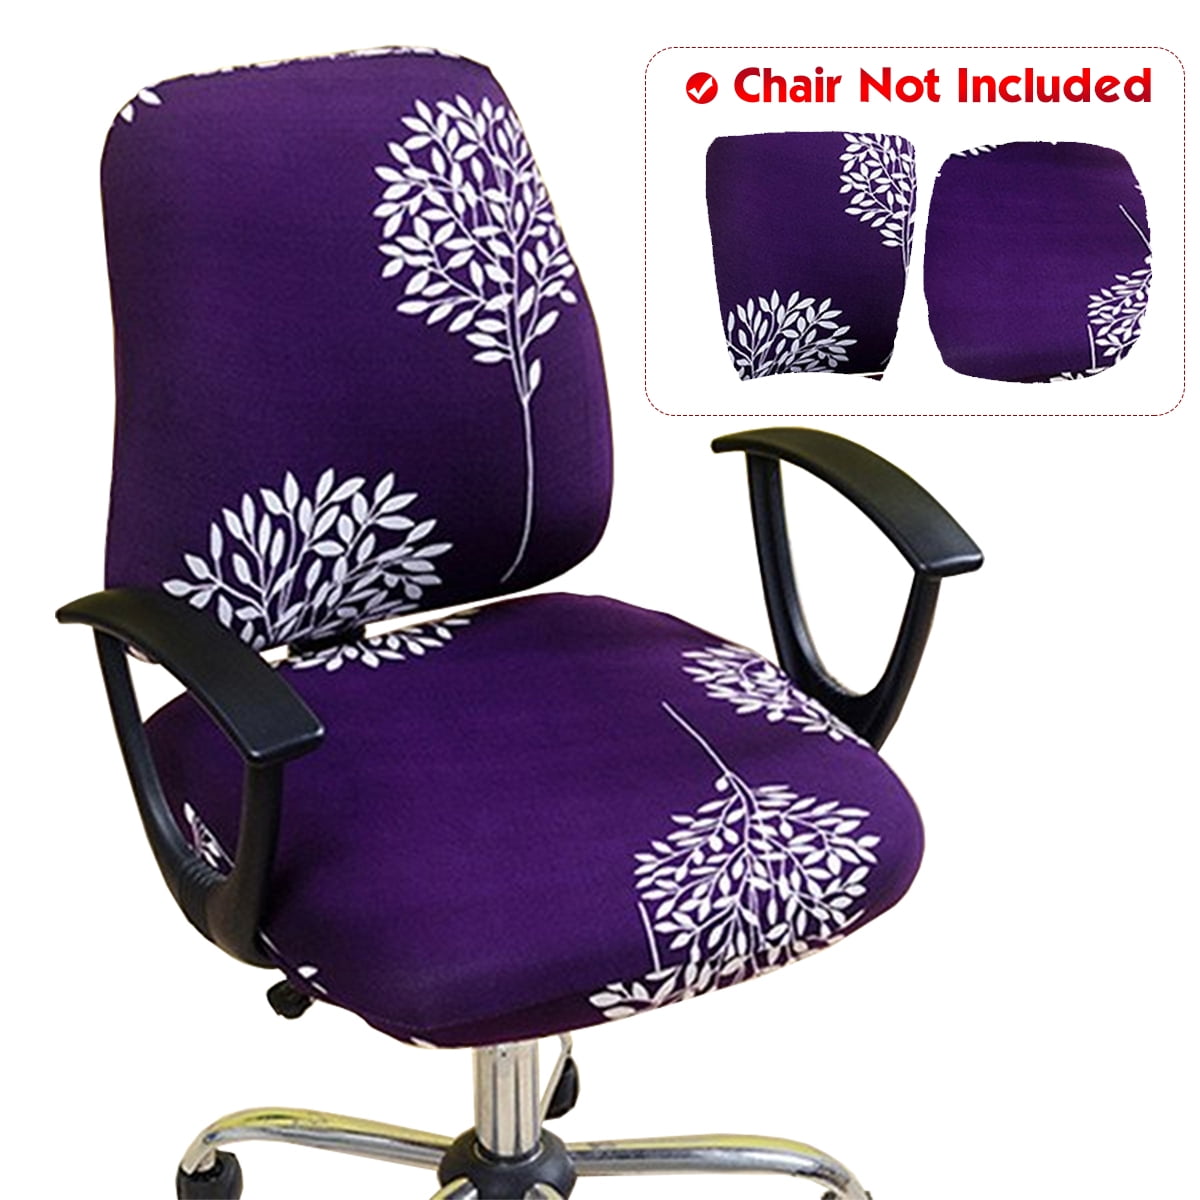 Spandex Elastic Office Chair Slip Cover Protector Rotating Chair Seat Purple 